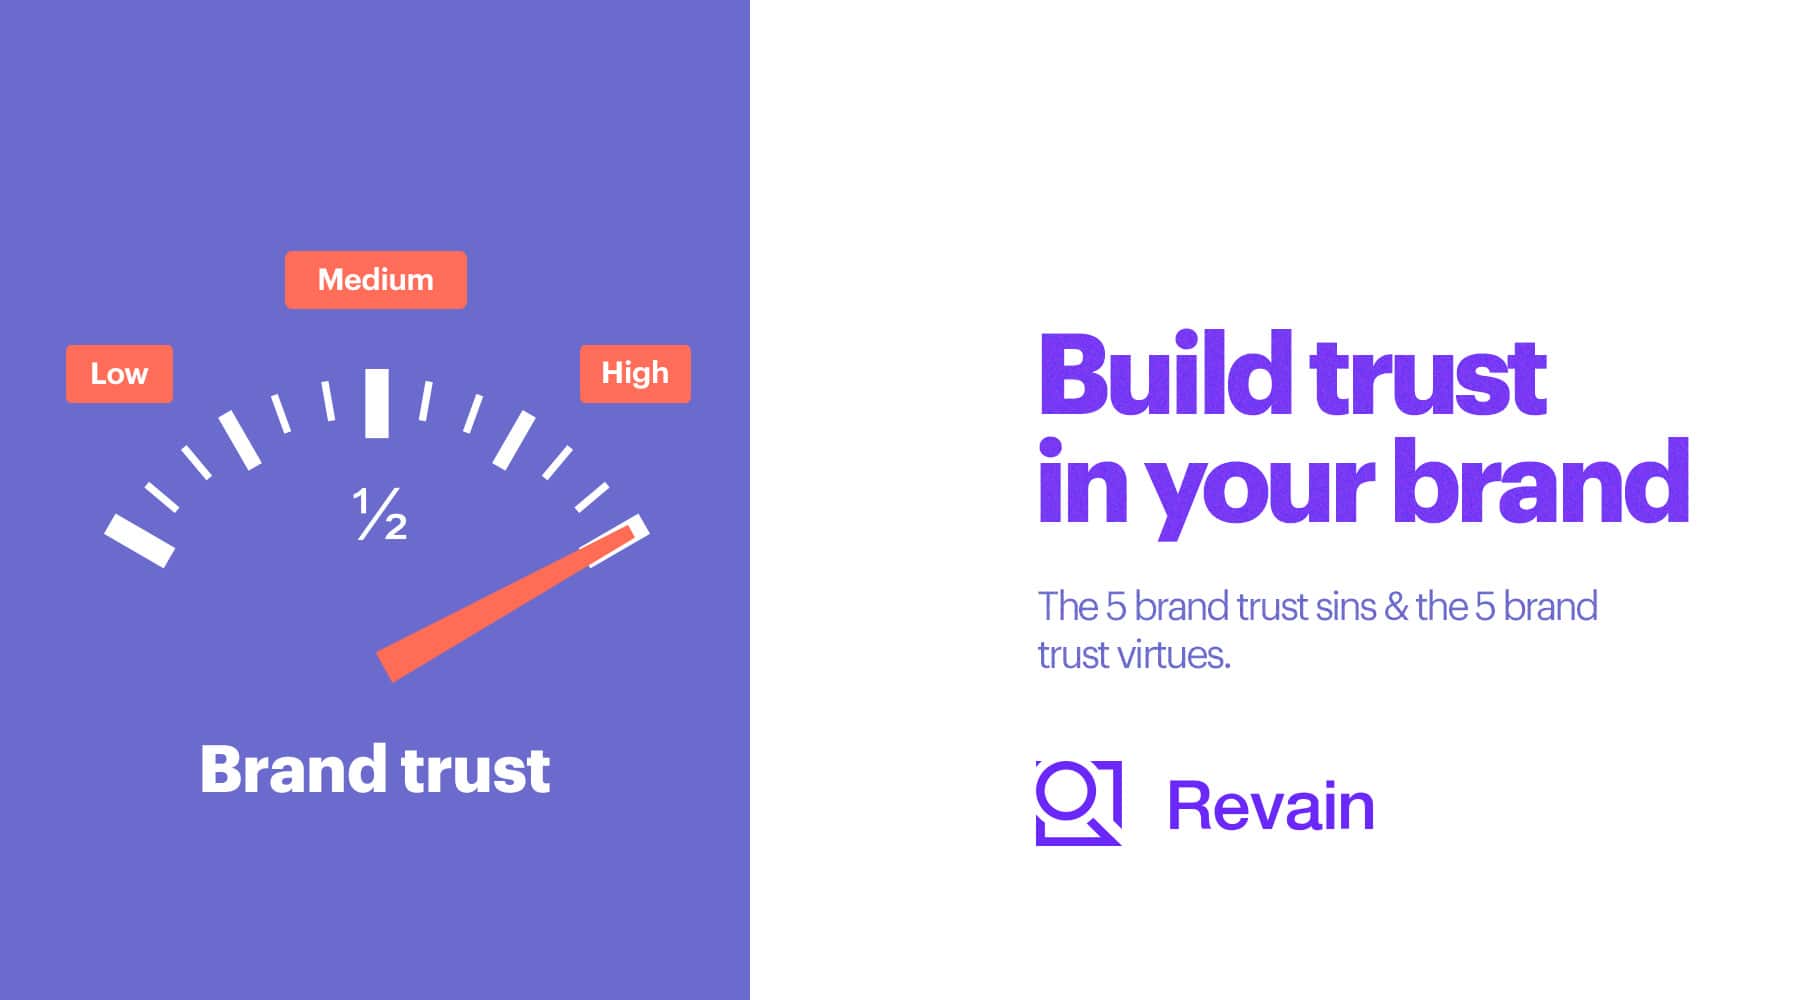 Article Build trust in your brand: 5 sins and 5 virues